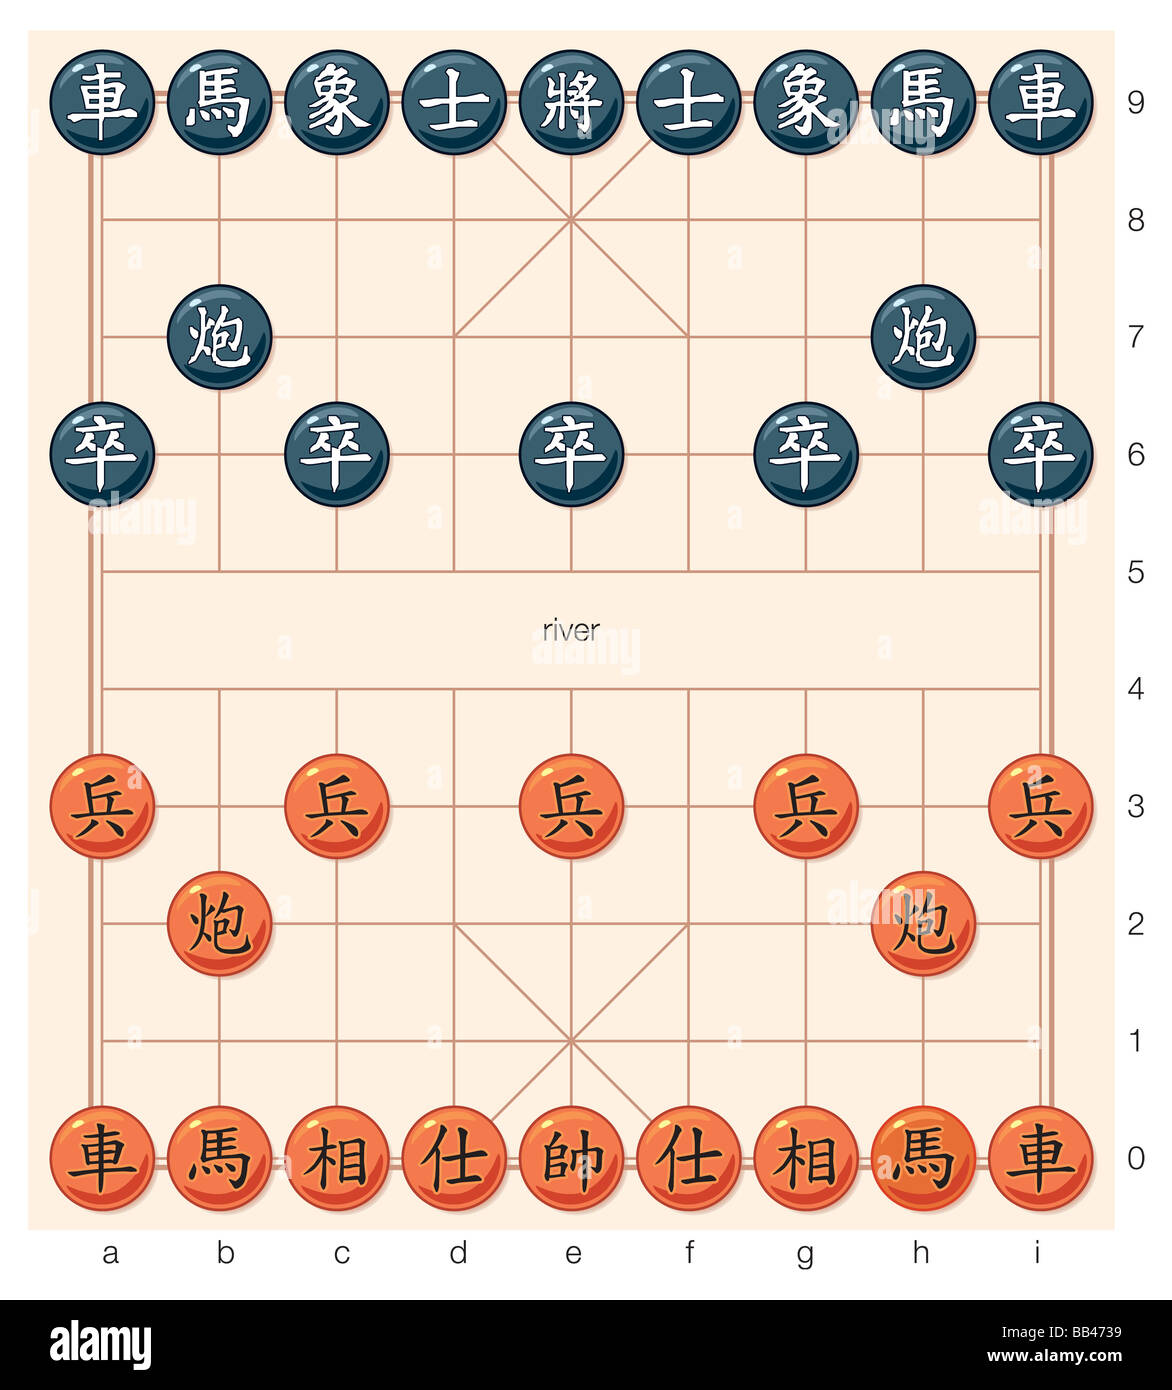 The position of Chinese chess pieces at the beginning of a game. Stock Photo